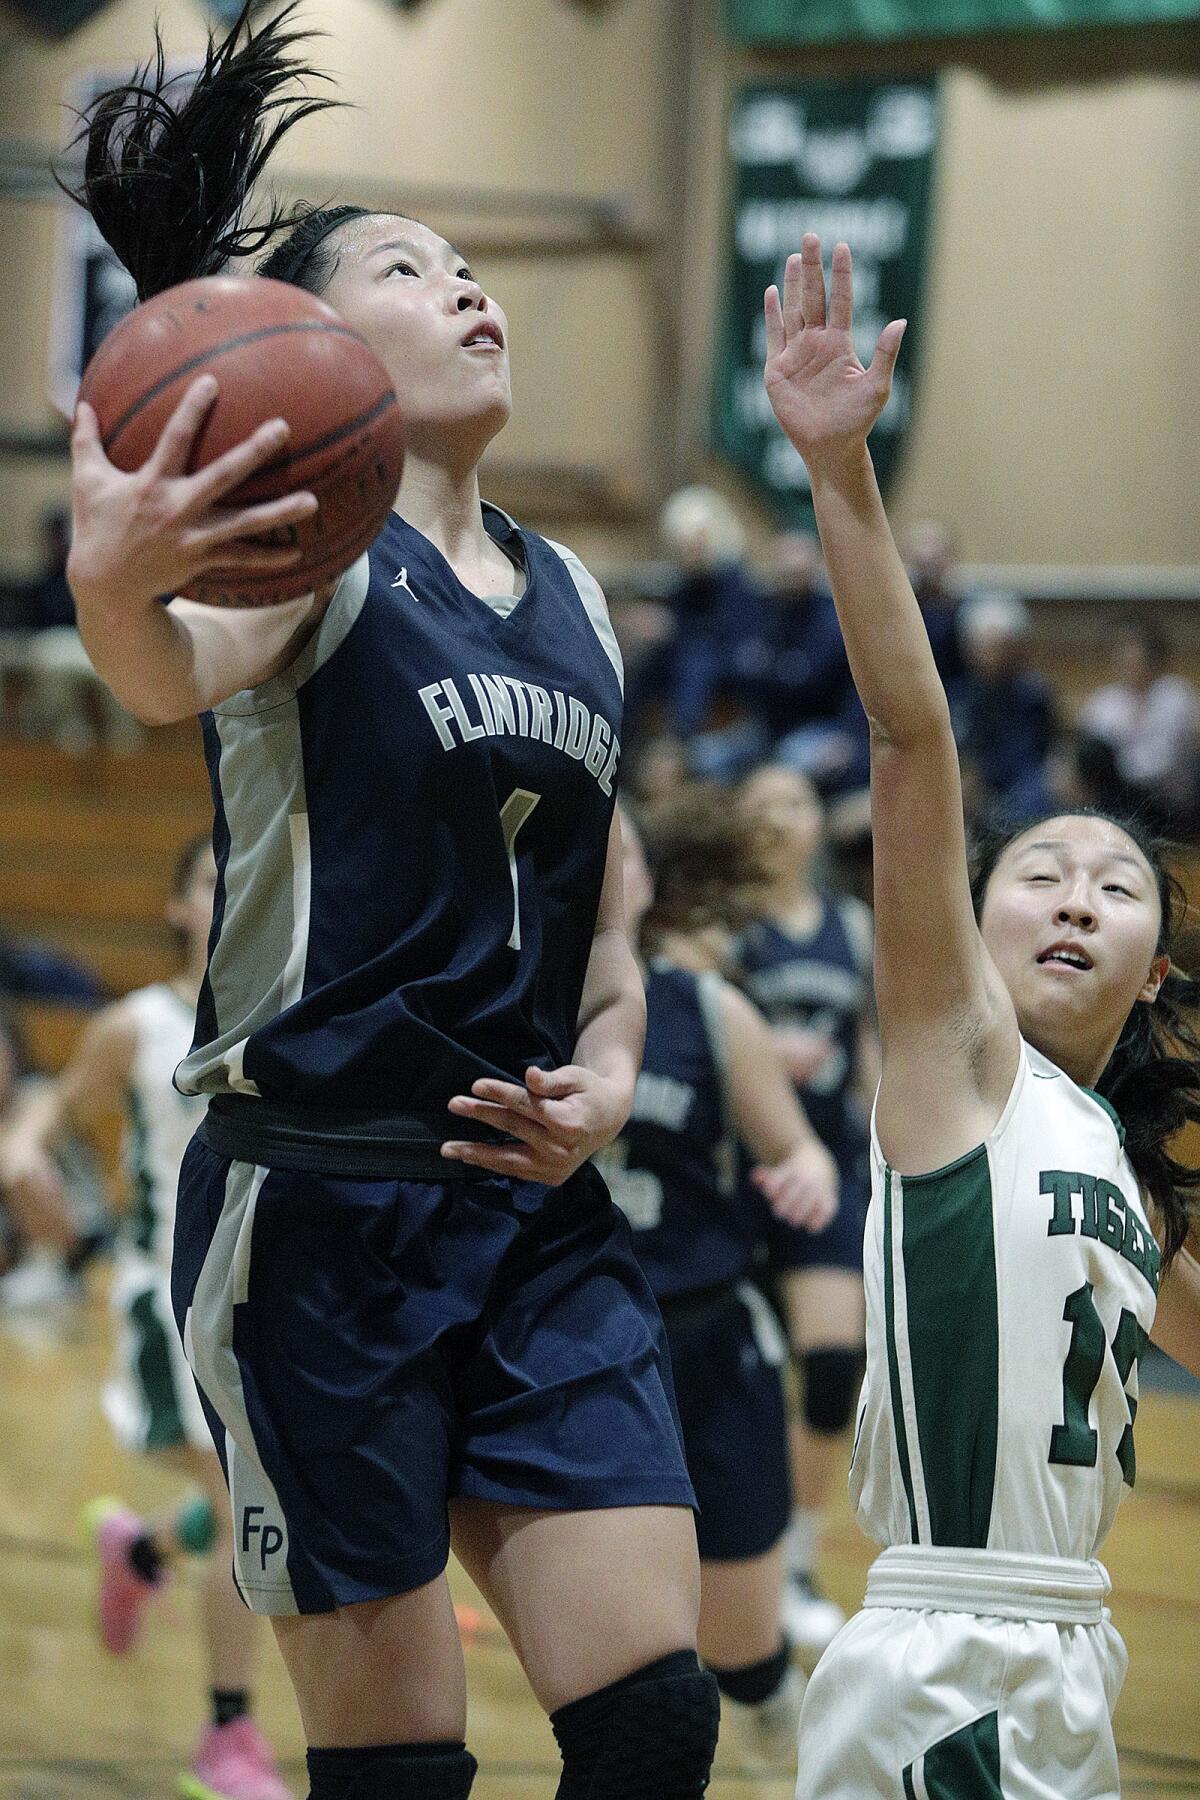 Flintridge Prep's Kaitlyn Chen drives and shoots against Westridge's Cassandra Kuo in a Prep League girls' basketball game at Westridge School in Pasadena on Thursday, January 16, 2020.